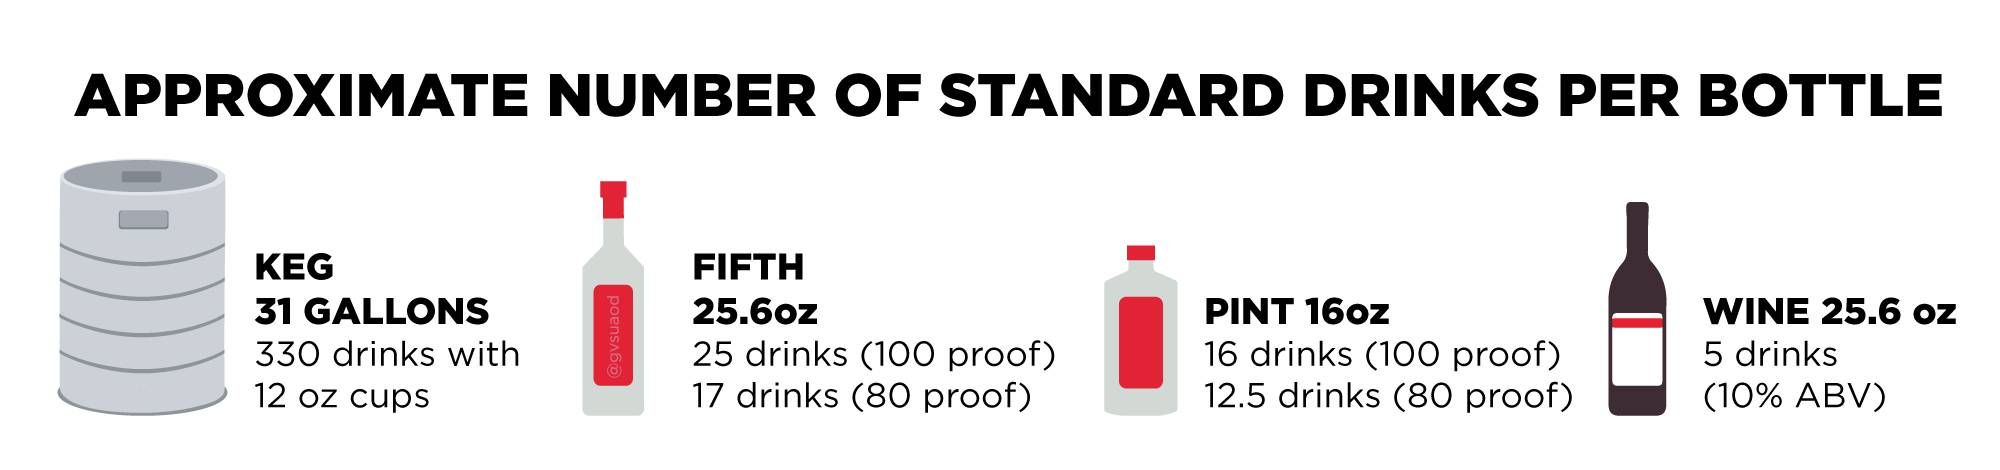 Approximate number of standard drinks: KEG 31 GALLONS 330 drinks with 12 oz cups, FIFTH  25.6oz 25 drinks (100 proof) 17 drinks (80 proof), PINT 16oz 16 drinks (100 proof) 12.5 drinks (80 proof),WINE 25.6 oz 5 drinks  (10% ABV)